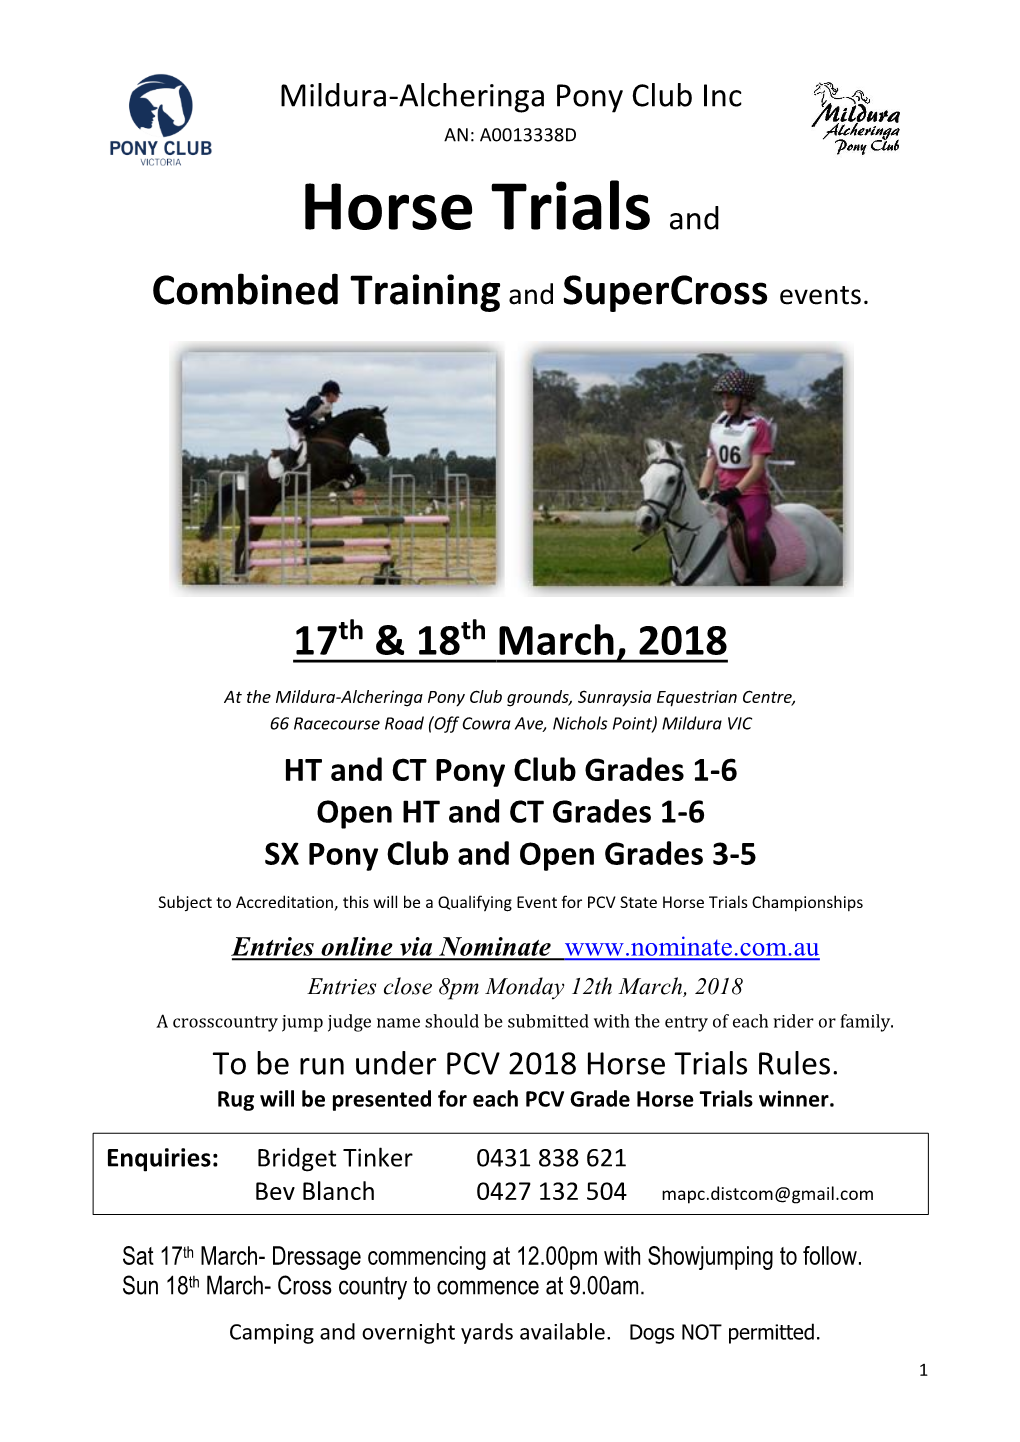 Horse Trials and Combined Training and Supercross Events